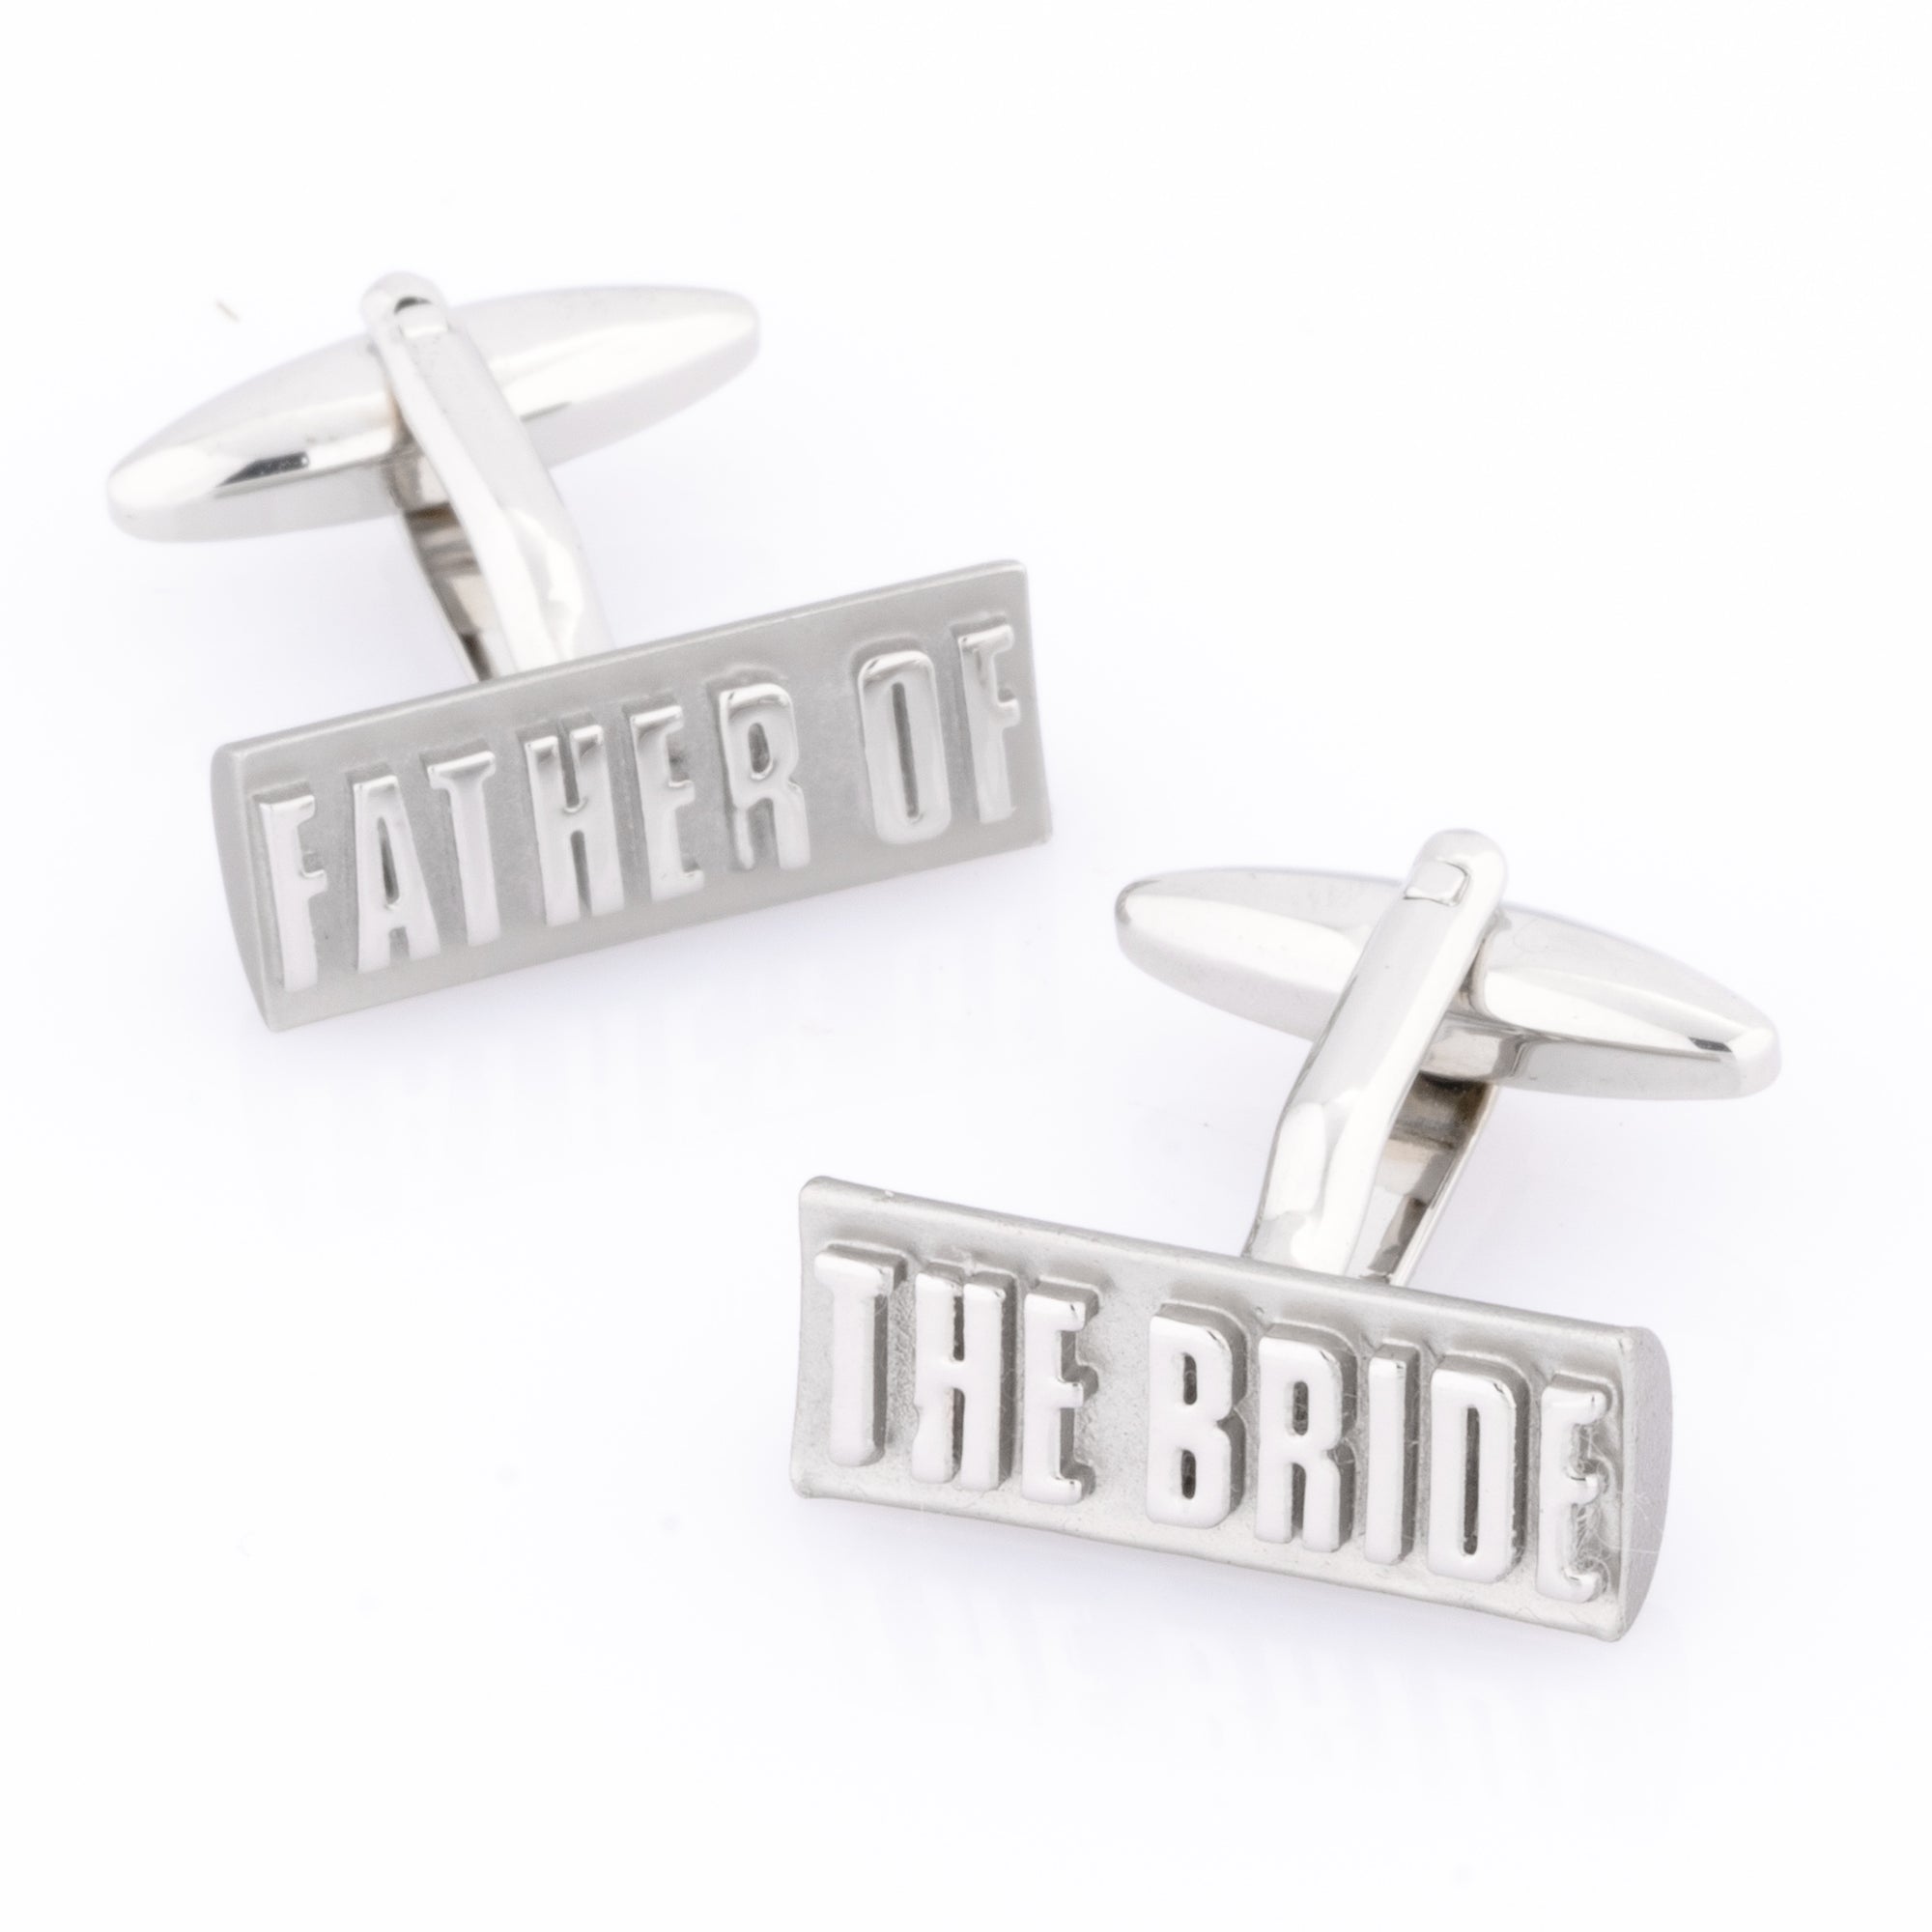  Father of the Bride Raised Lettering Cufflinks, Wedding Cufflinks, CL9554, Mens Cufflinks, Cufflinks, Cuffed, Clinks, Clinks Australia